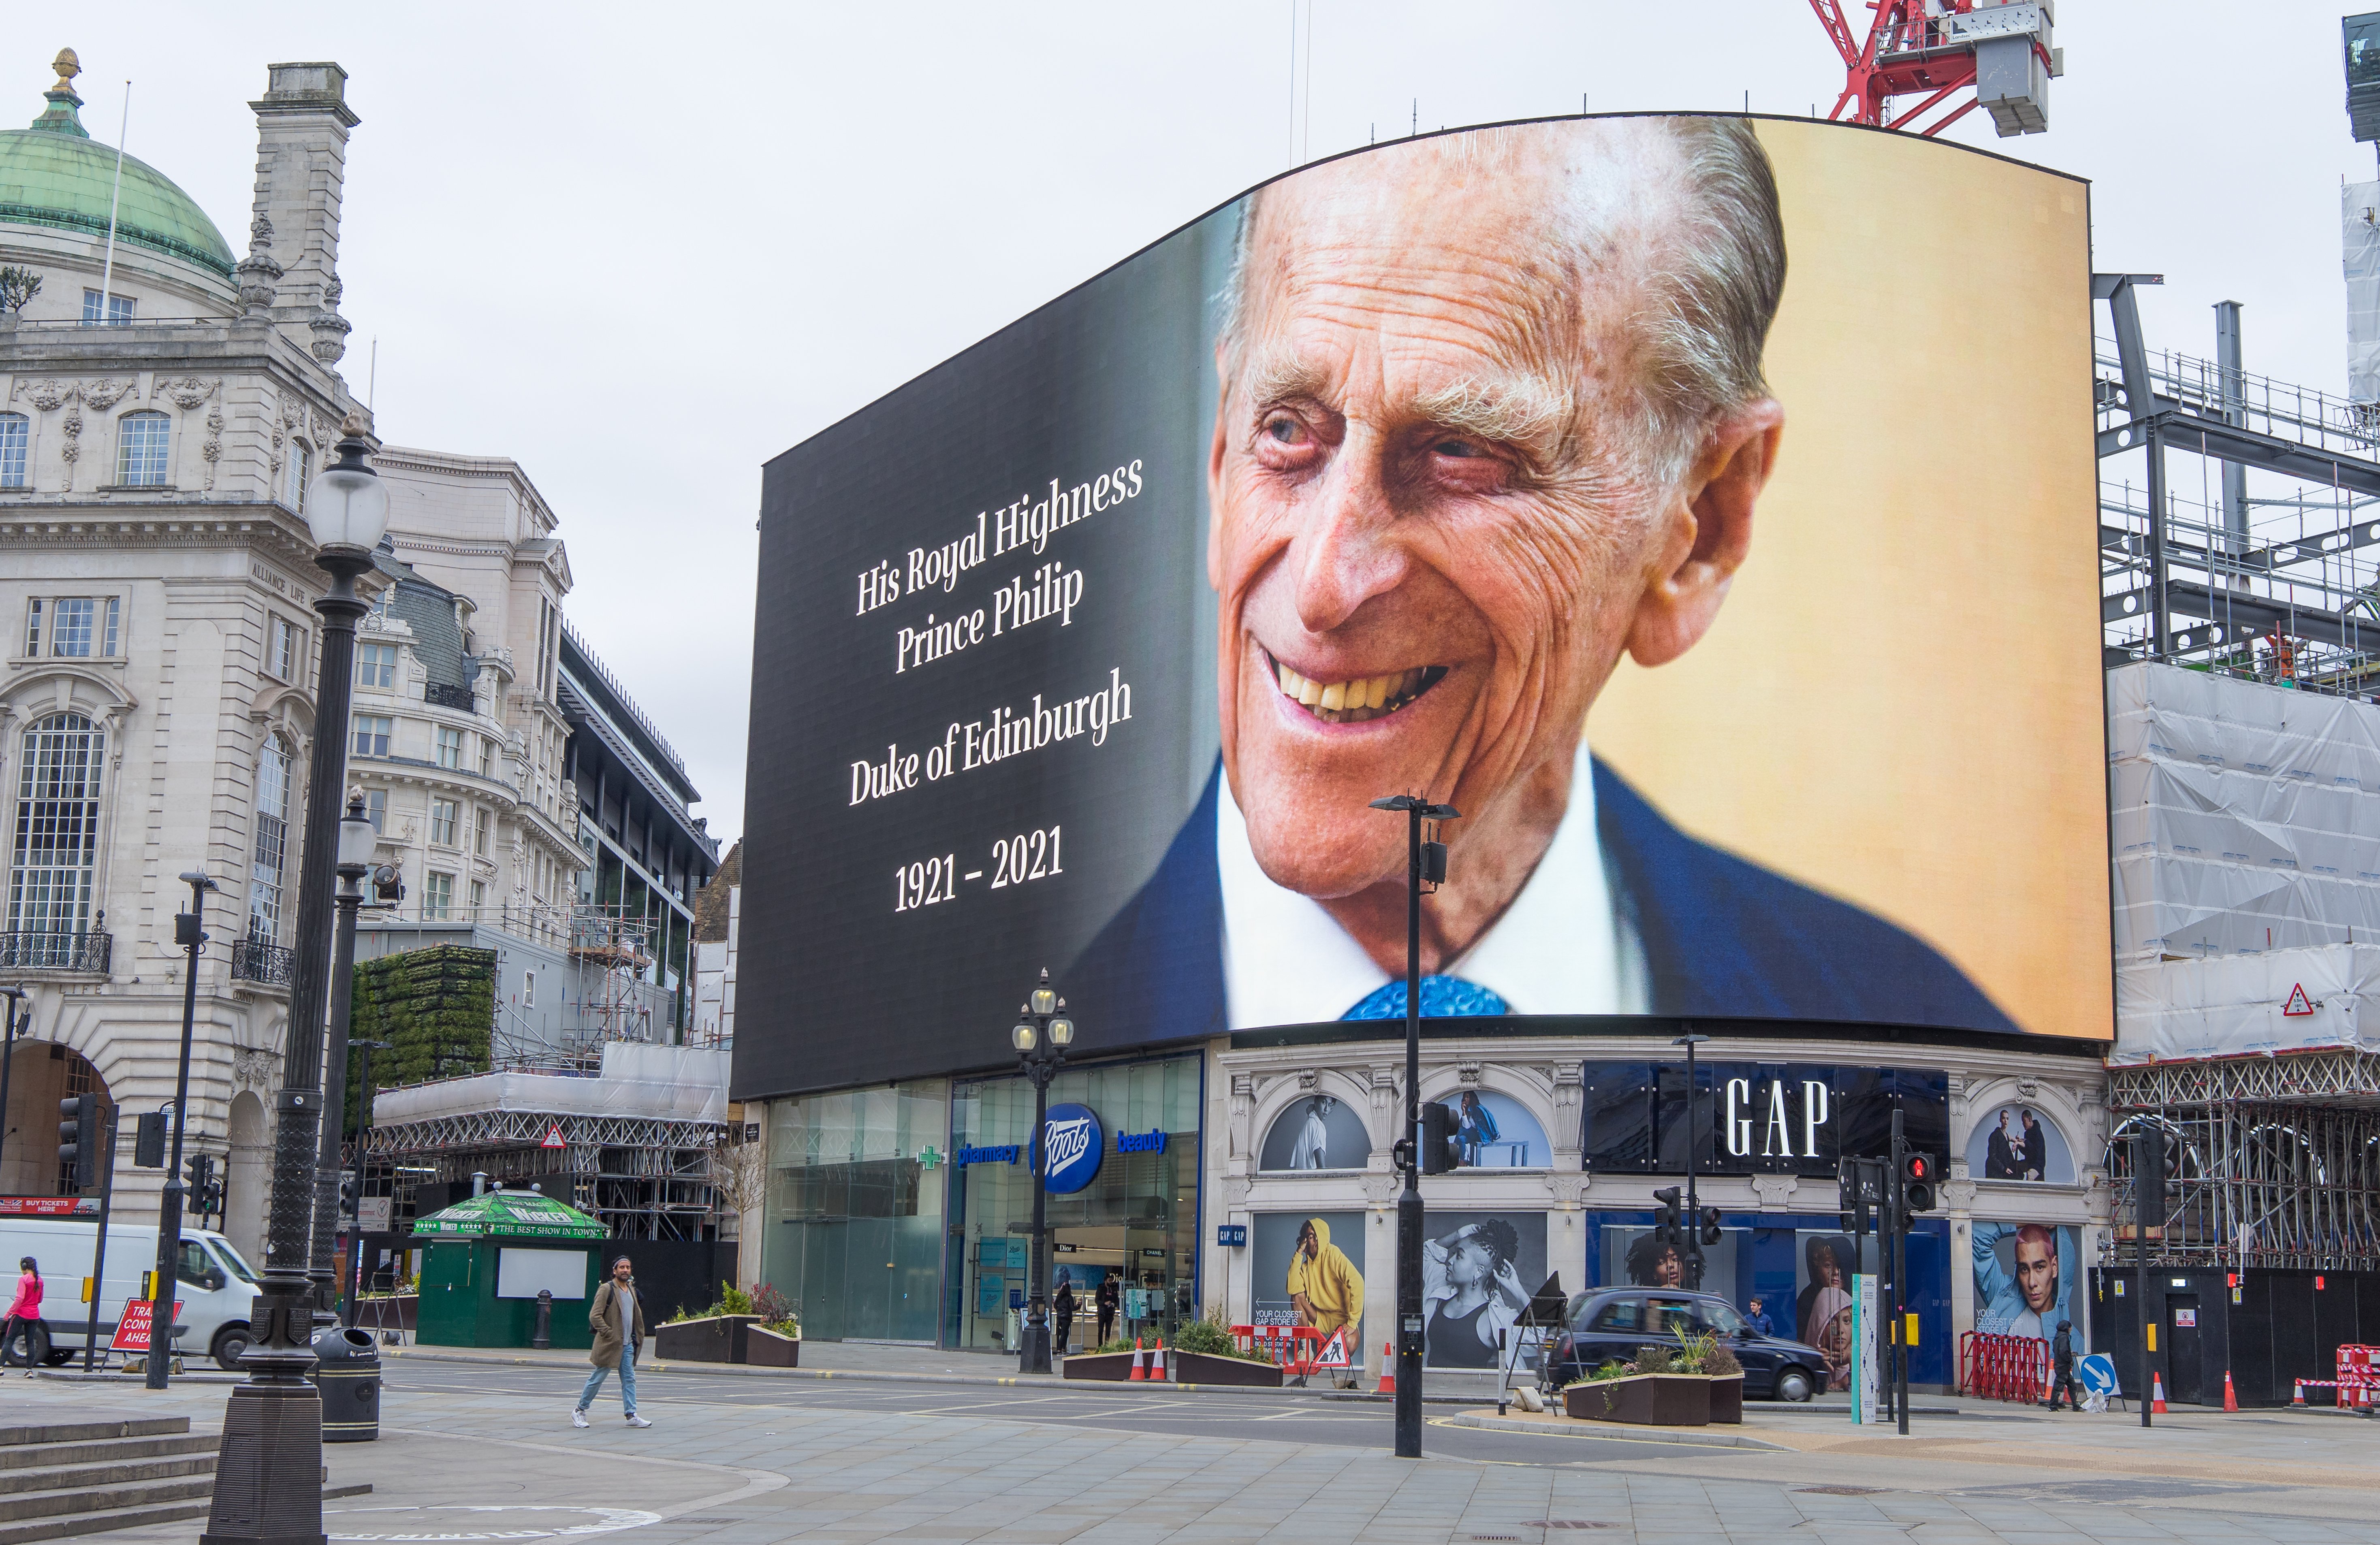 Piccadilly Circus paying respect to Prince Philip following the announcement of his death on April 10, 2021, London | Photo: Shutterstock